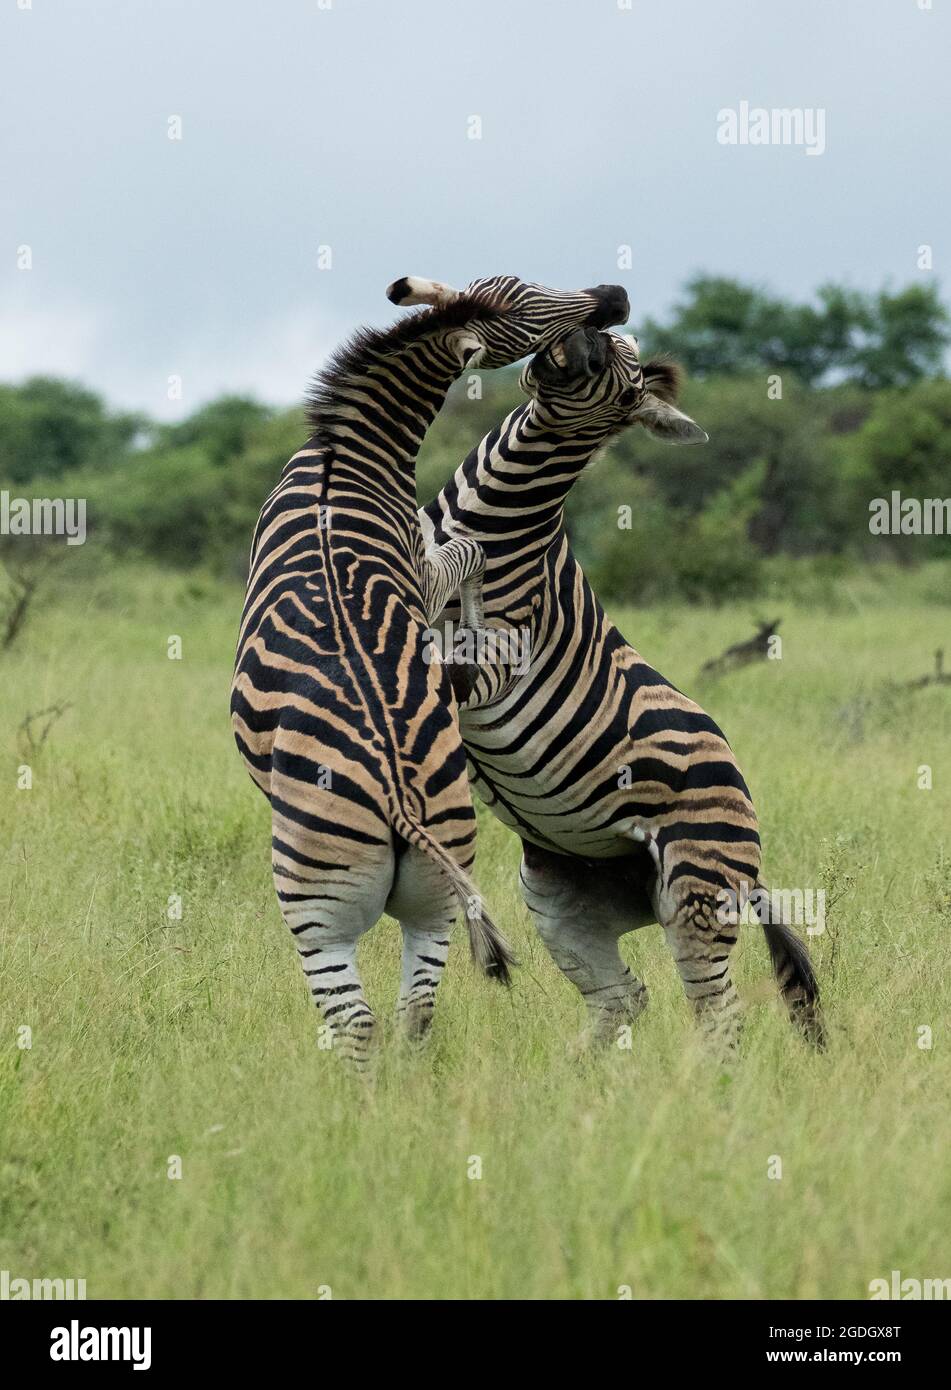 Zebras can deliver a nasty bite when in a fight situation. HOEDSPRUIT, SOUTH AFRICA: In one image, both zebras were captured reared up on their hind l Stock Photo